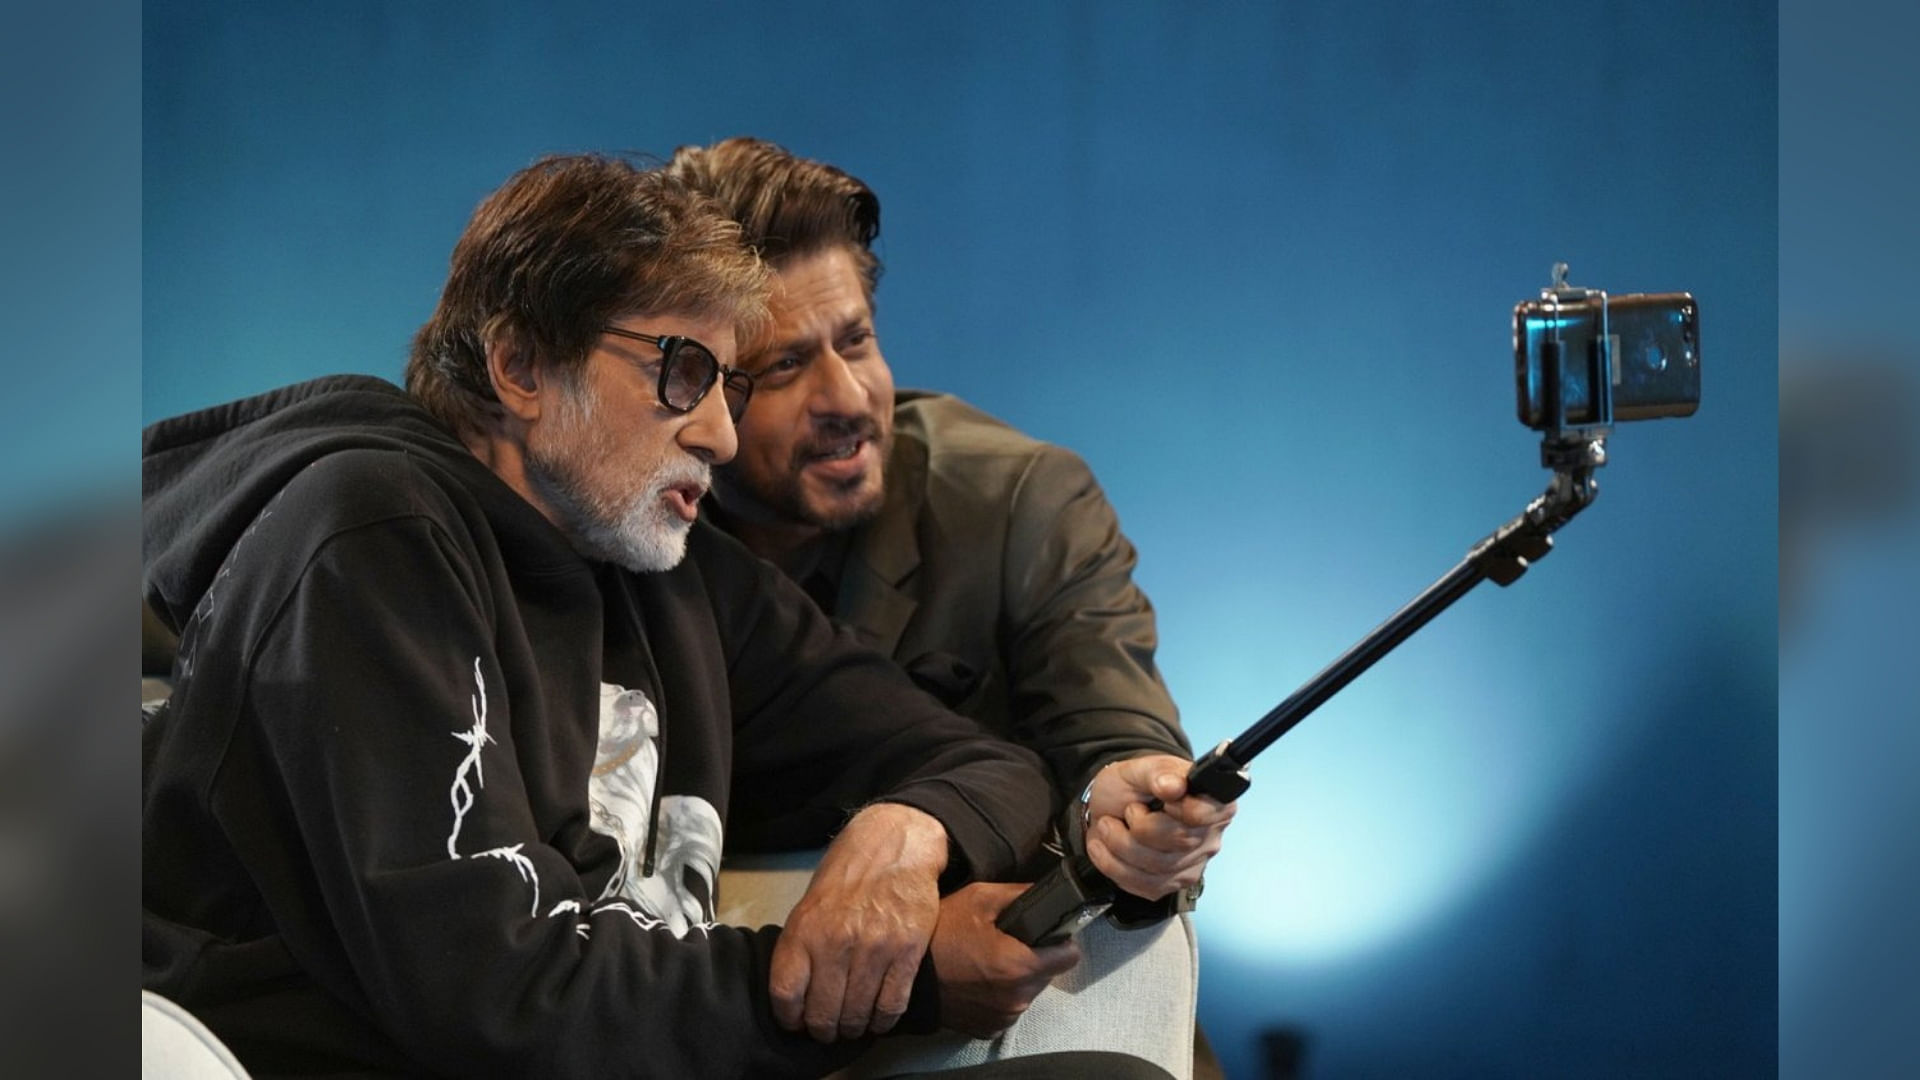 Amitabh Bachchan and Shah Rukh Khan attempt to record a selfie video.